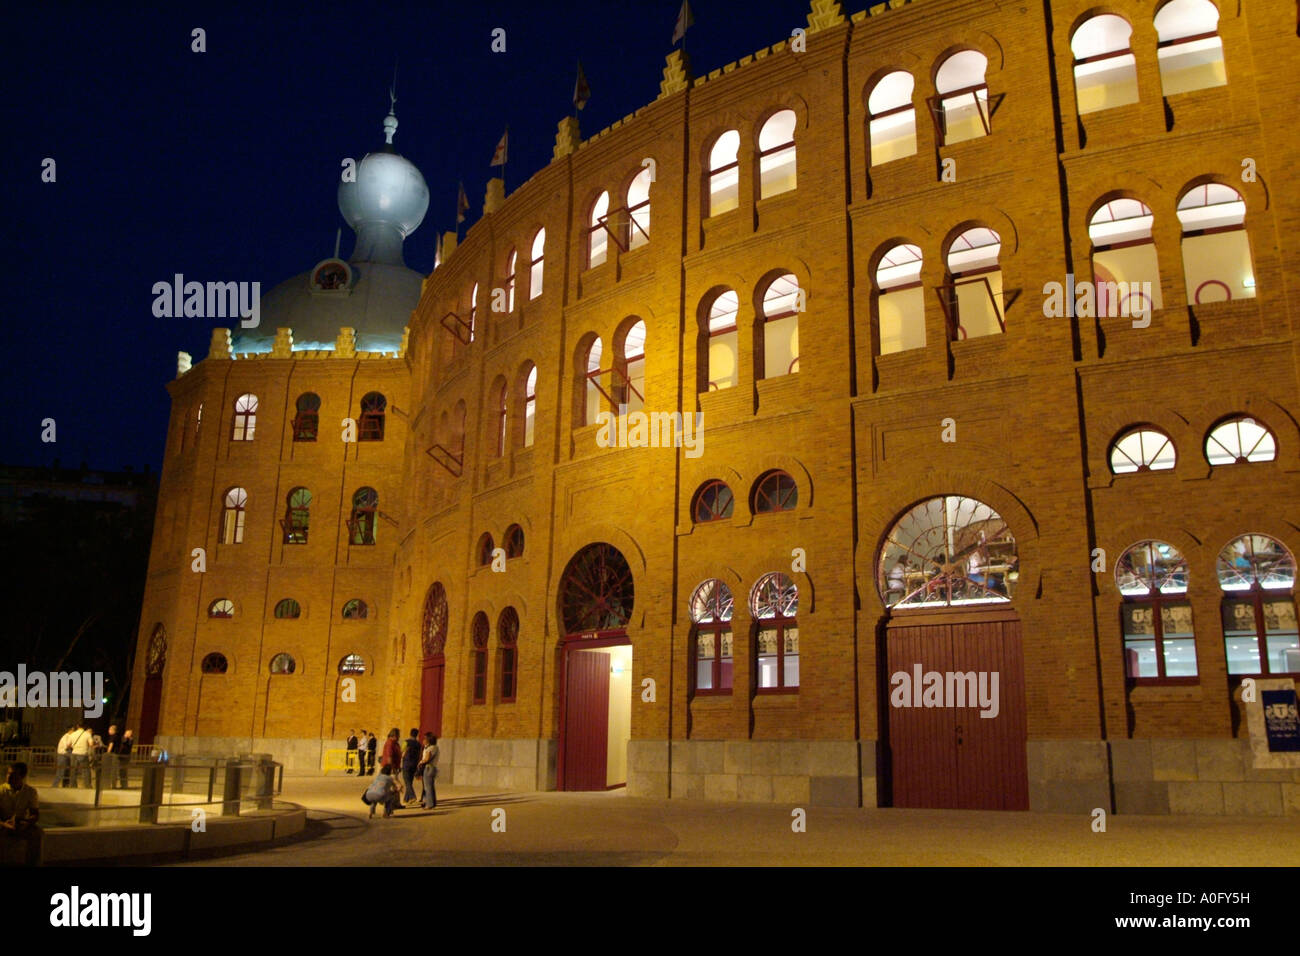 The Campo Pequeno bullring in Lisbon at night Stock Photo